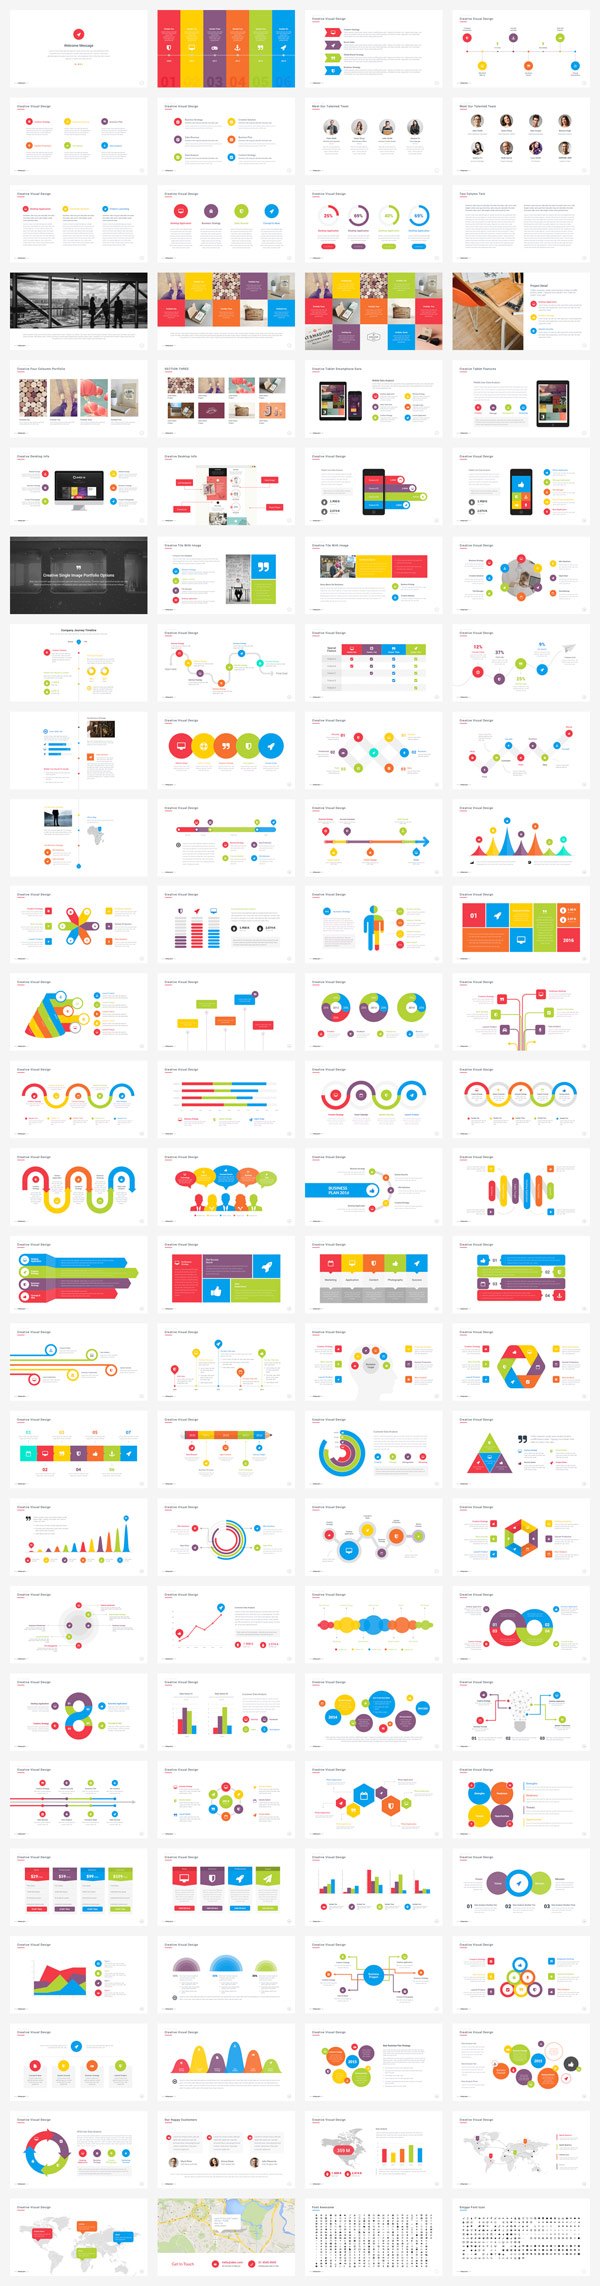 Look at all the pre designed slides with colorful infographics, charts, and much more.